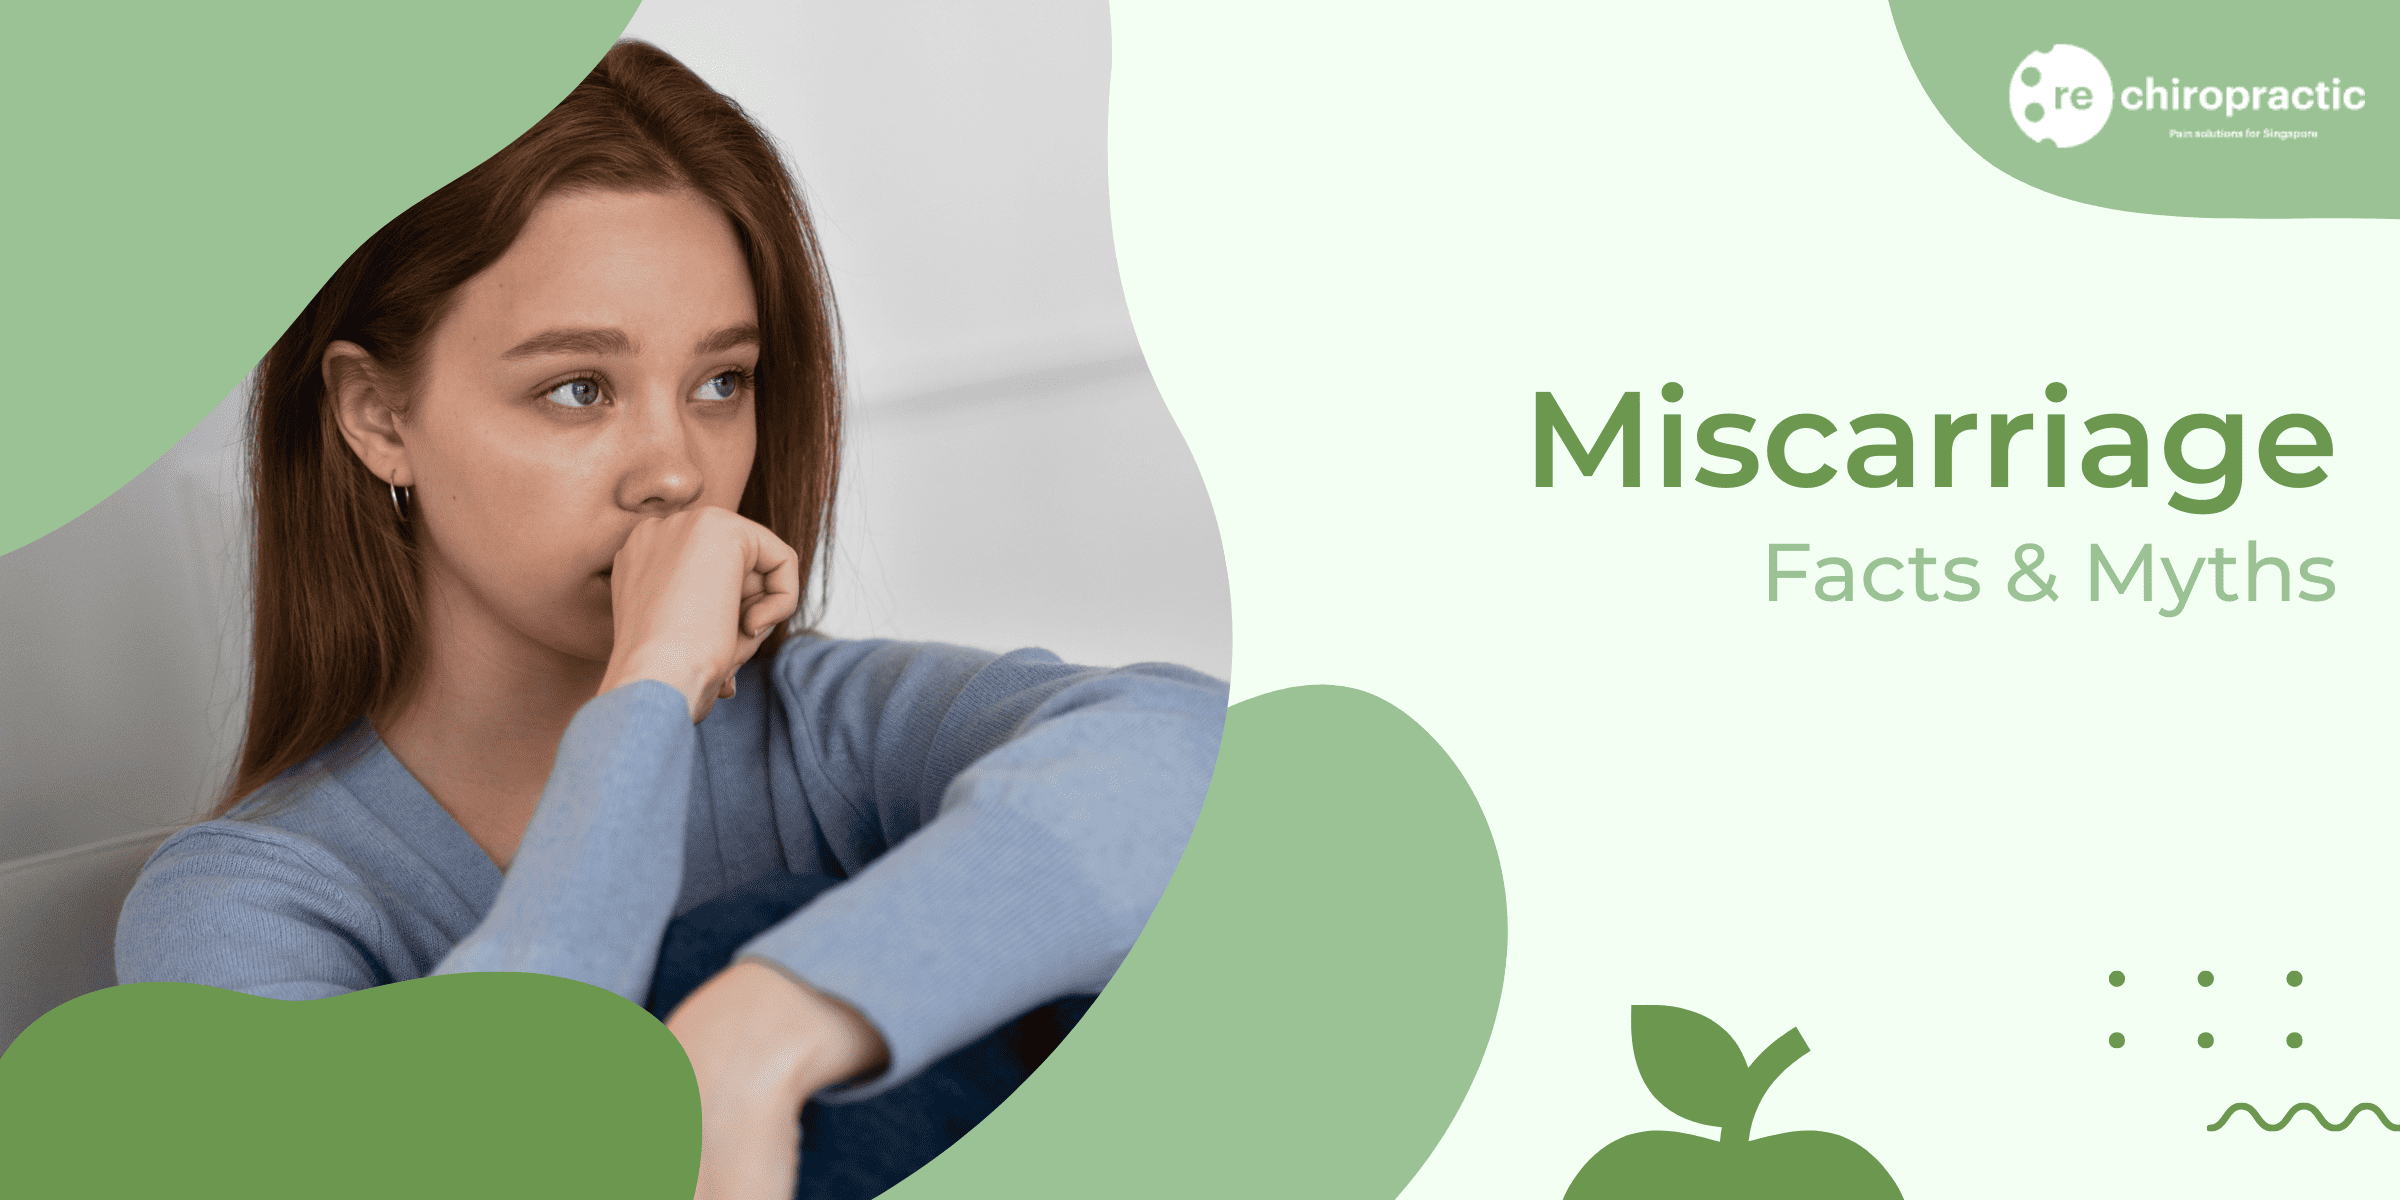 Facts & Myths about Miscarriage 1